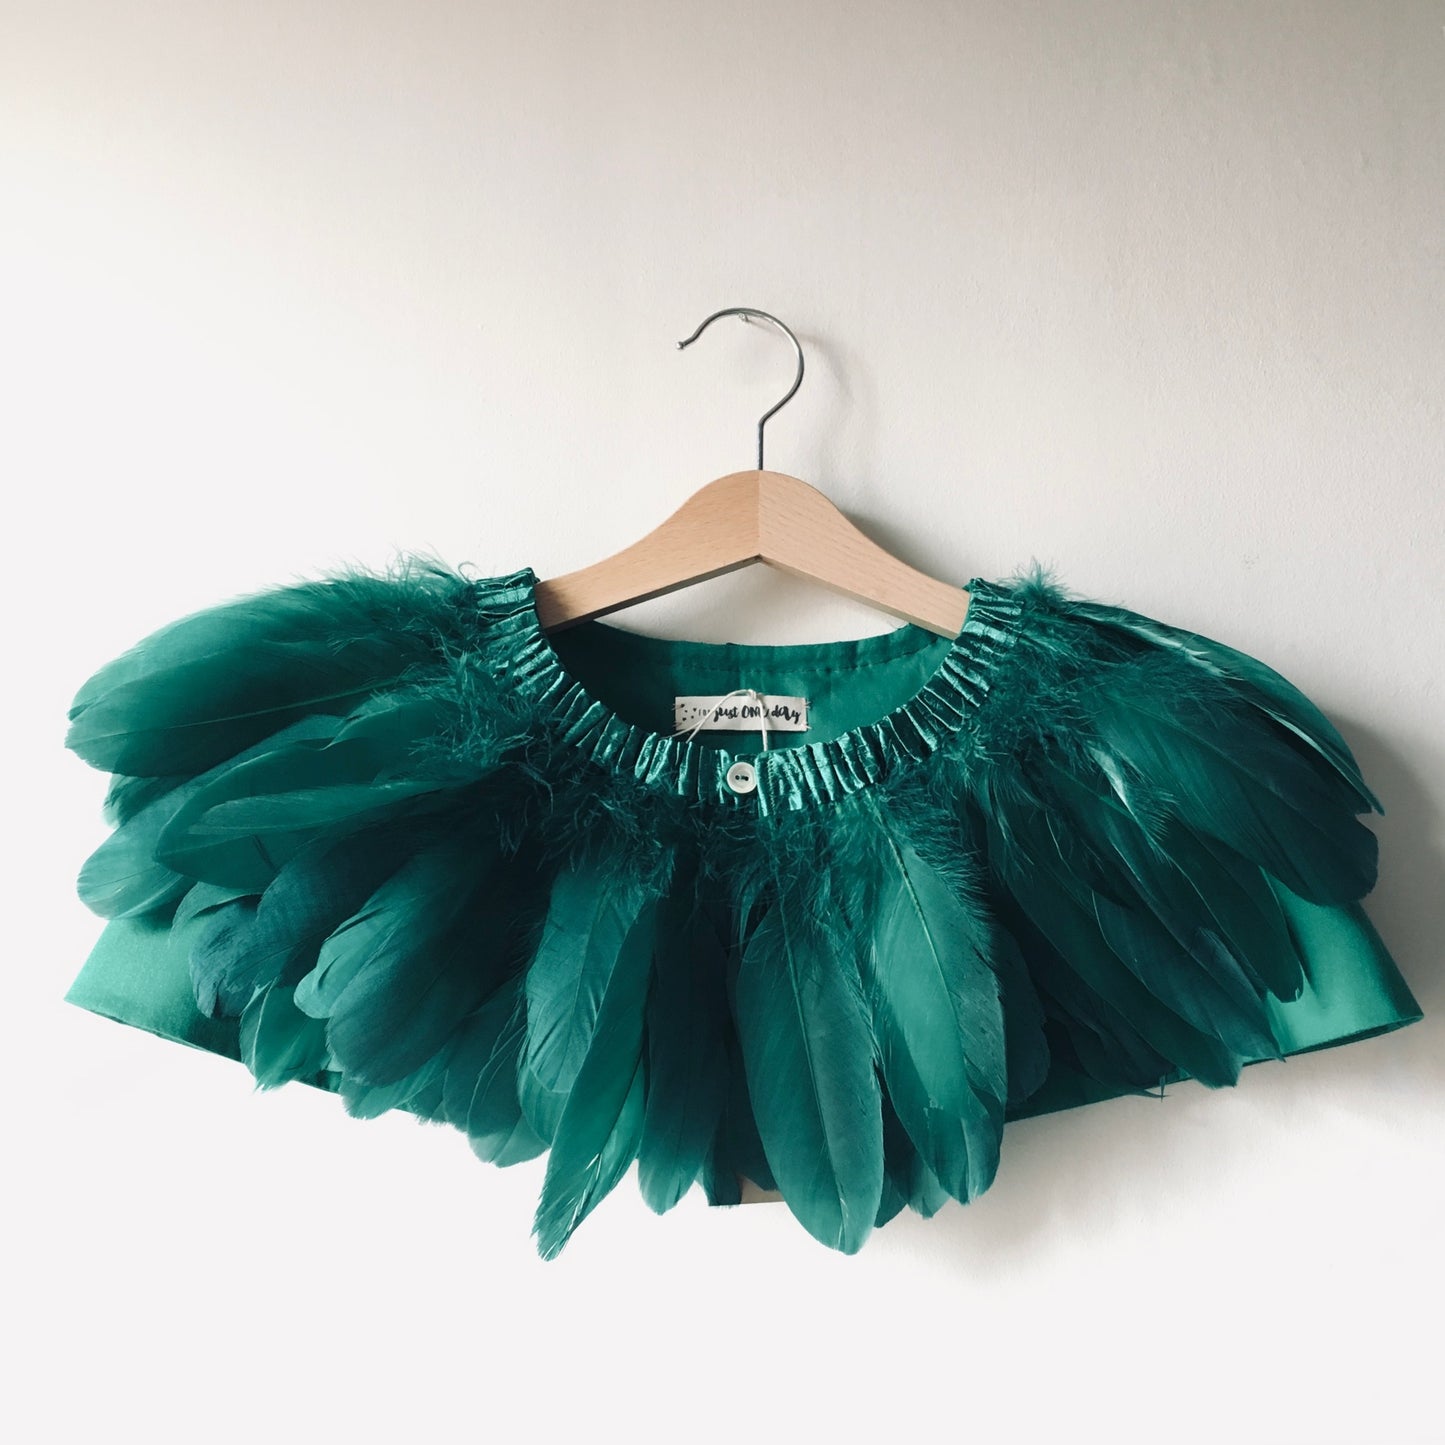 Emerald green feather cape on wooden hanger